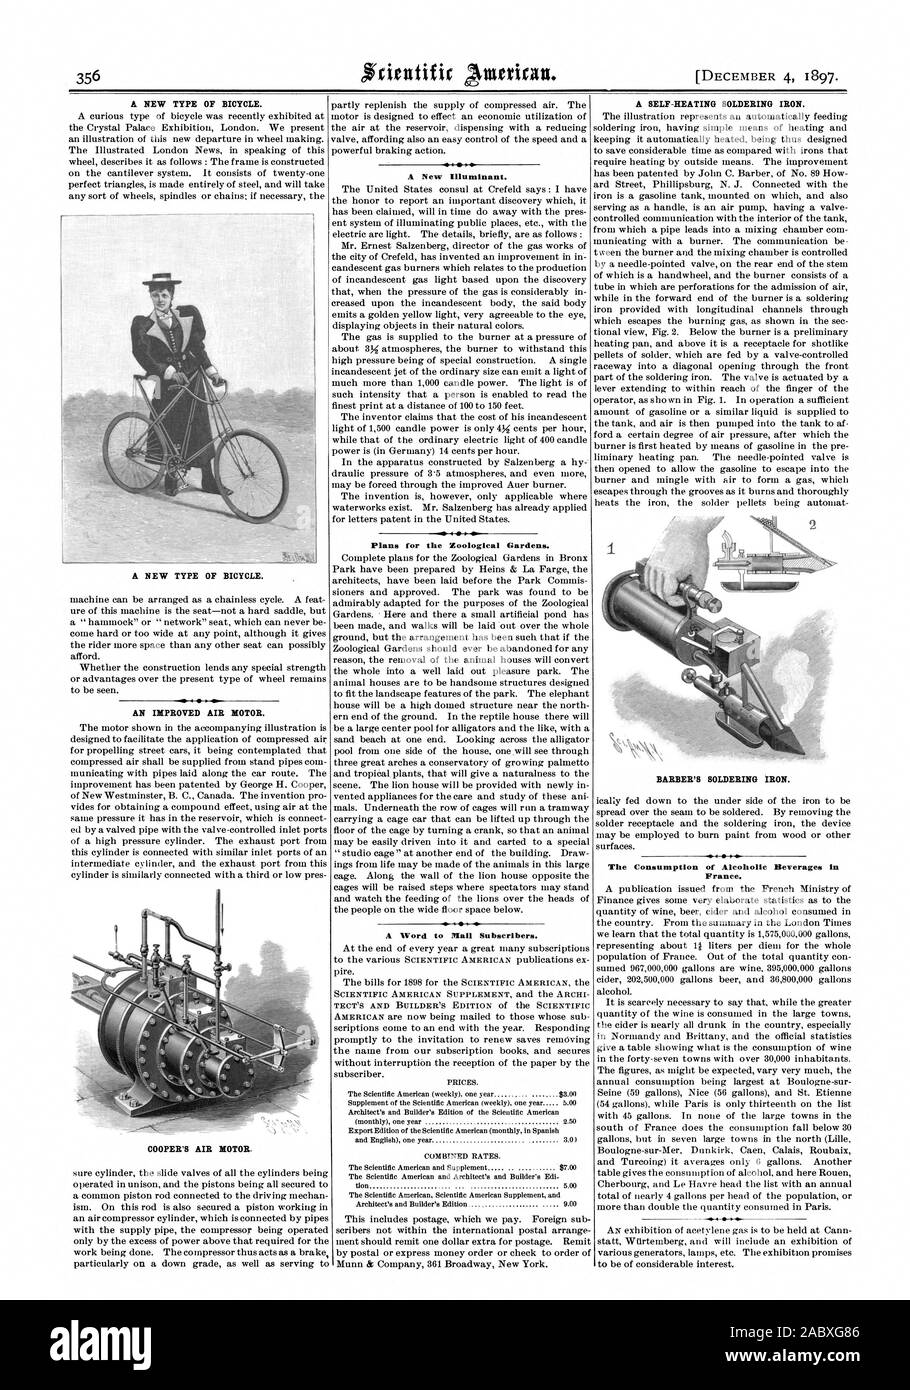 A NEW TYPE OF BICYCLE. A NEW TYPE OF BICYCLE. AN IMPROVED AIR MOTOR. COOPER'S AIR MOTOR. A New Illuminant. Plans for the Zoological Gardens. A Word to Mall Subscribers. A SELF-HEATING SOLDERING IRON. BARBER'S SOLDERING IRON. The Consumption of Alcoholic Beverages in France., scientific american, 1897-12-04 Stock Photo